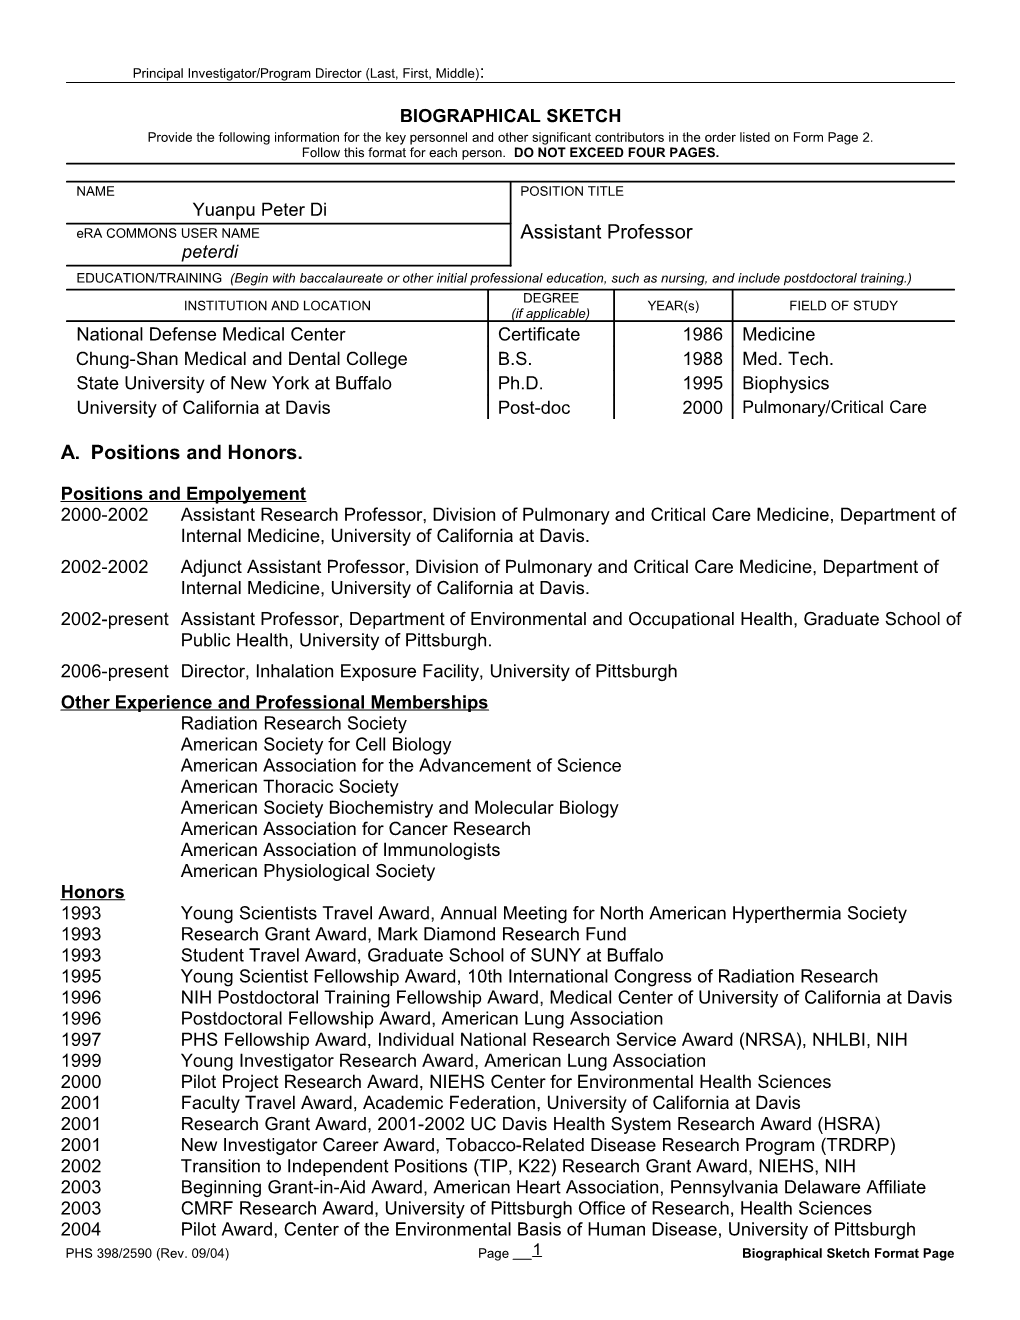 PHS 398 (Rev. 9/04), Biographical Sketch Format Page s10